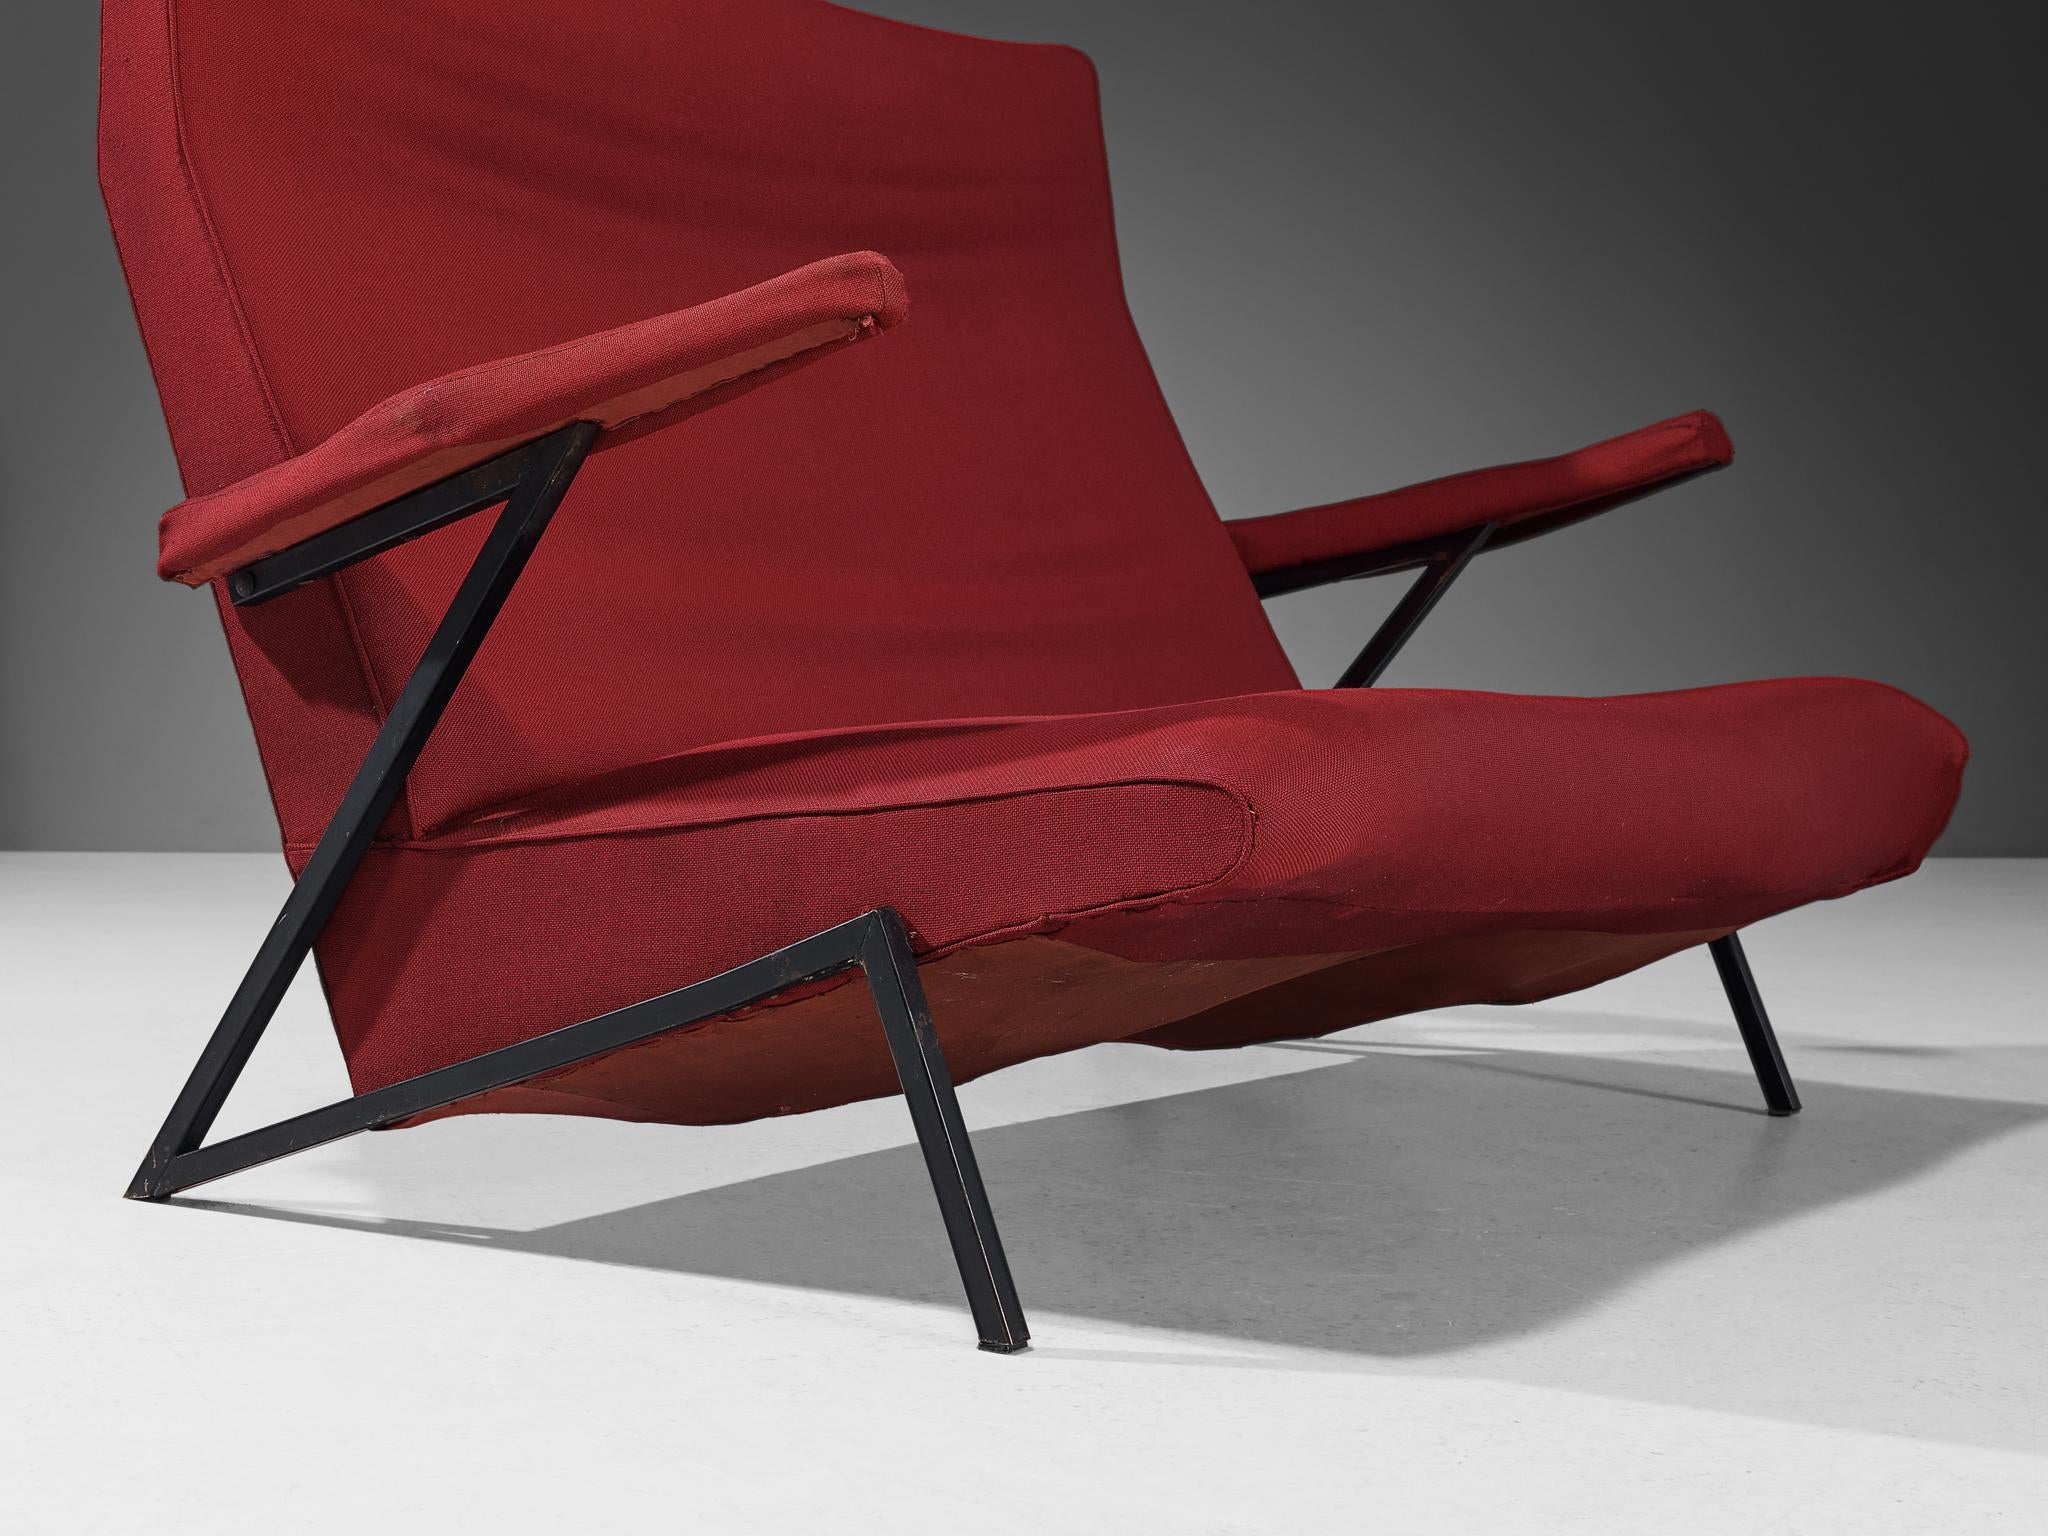 Italian Loveseat in Black Lacquered Metal and Red Upholstery